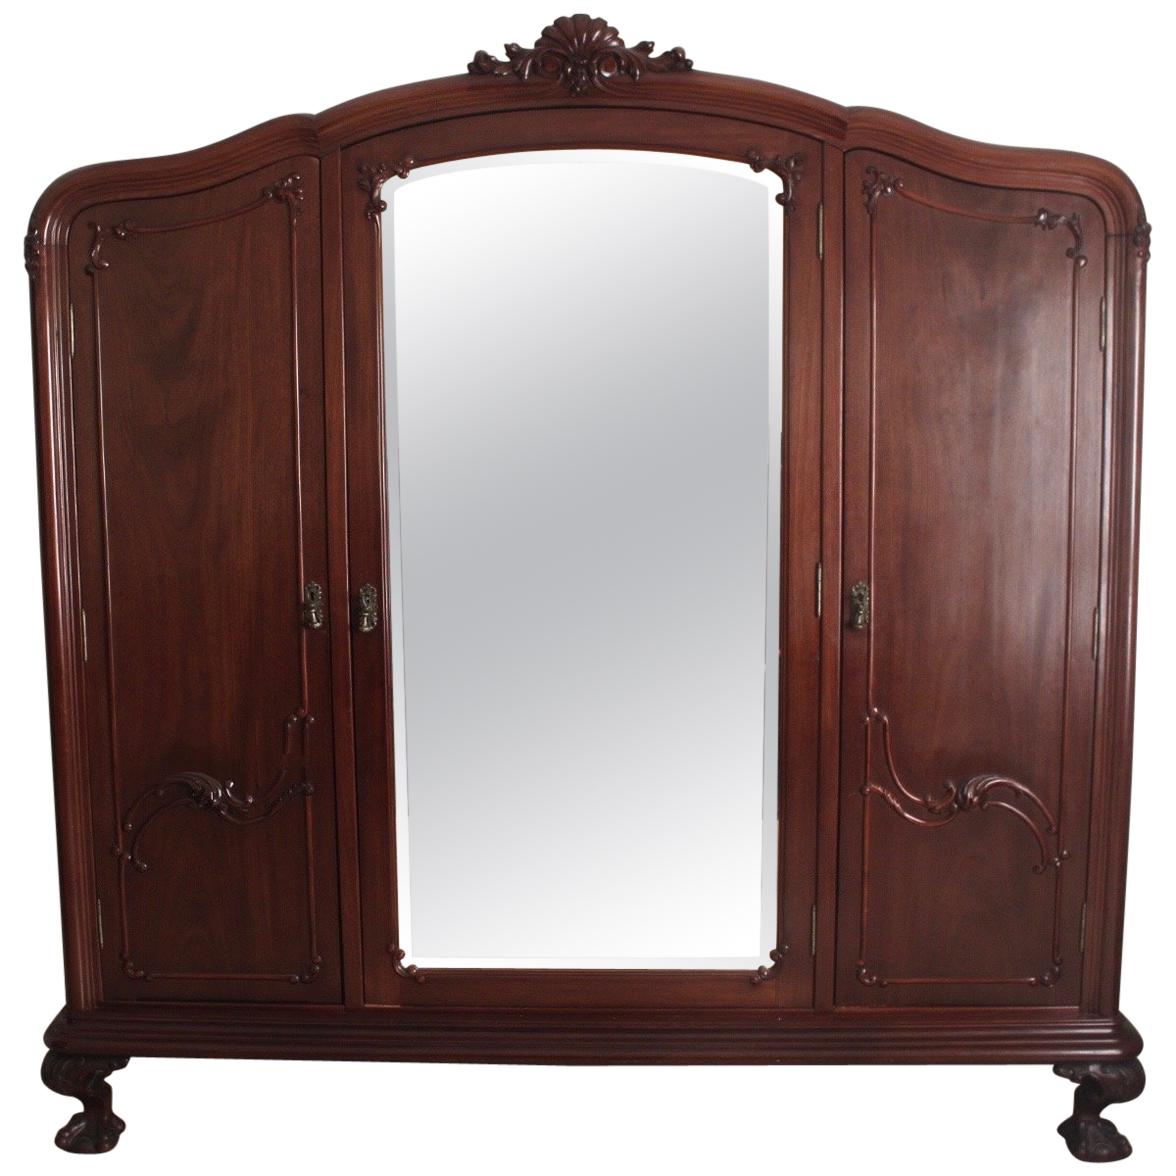 Chippendale Ball & Claw Mahogany Wood Armoire or Wardrobe with 3 Vanity Mirrors For Sale